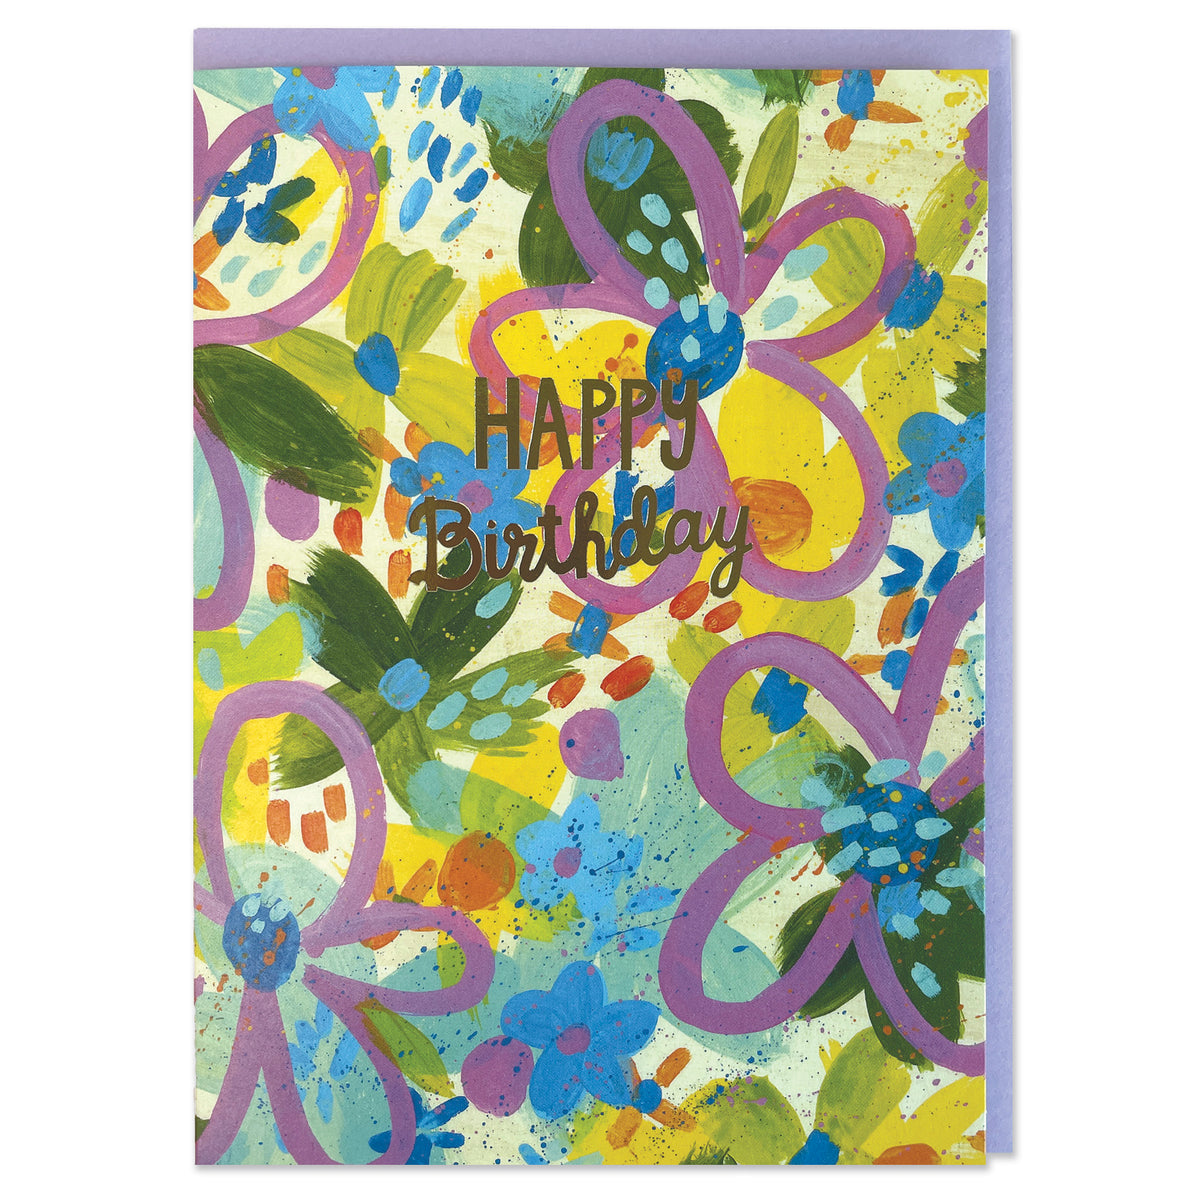 A colourful abstract painted floral greetings card to celebrate a birthday. The writing in the centre of the card is gold foil cursive writing stating &#39;Happy Birthday&#39;.